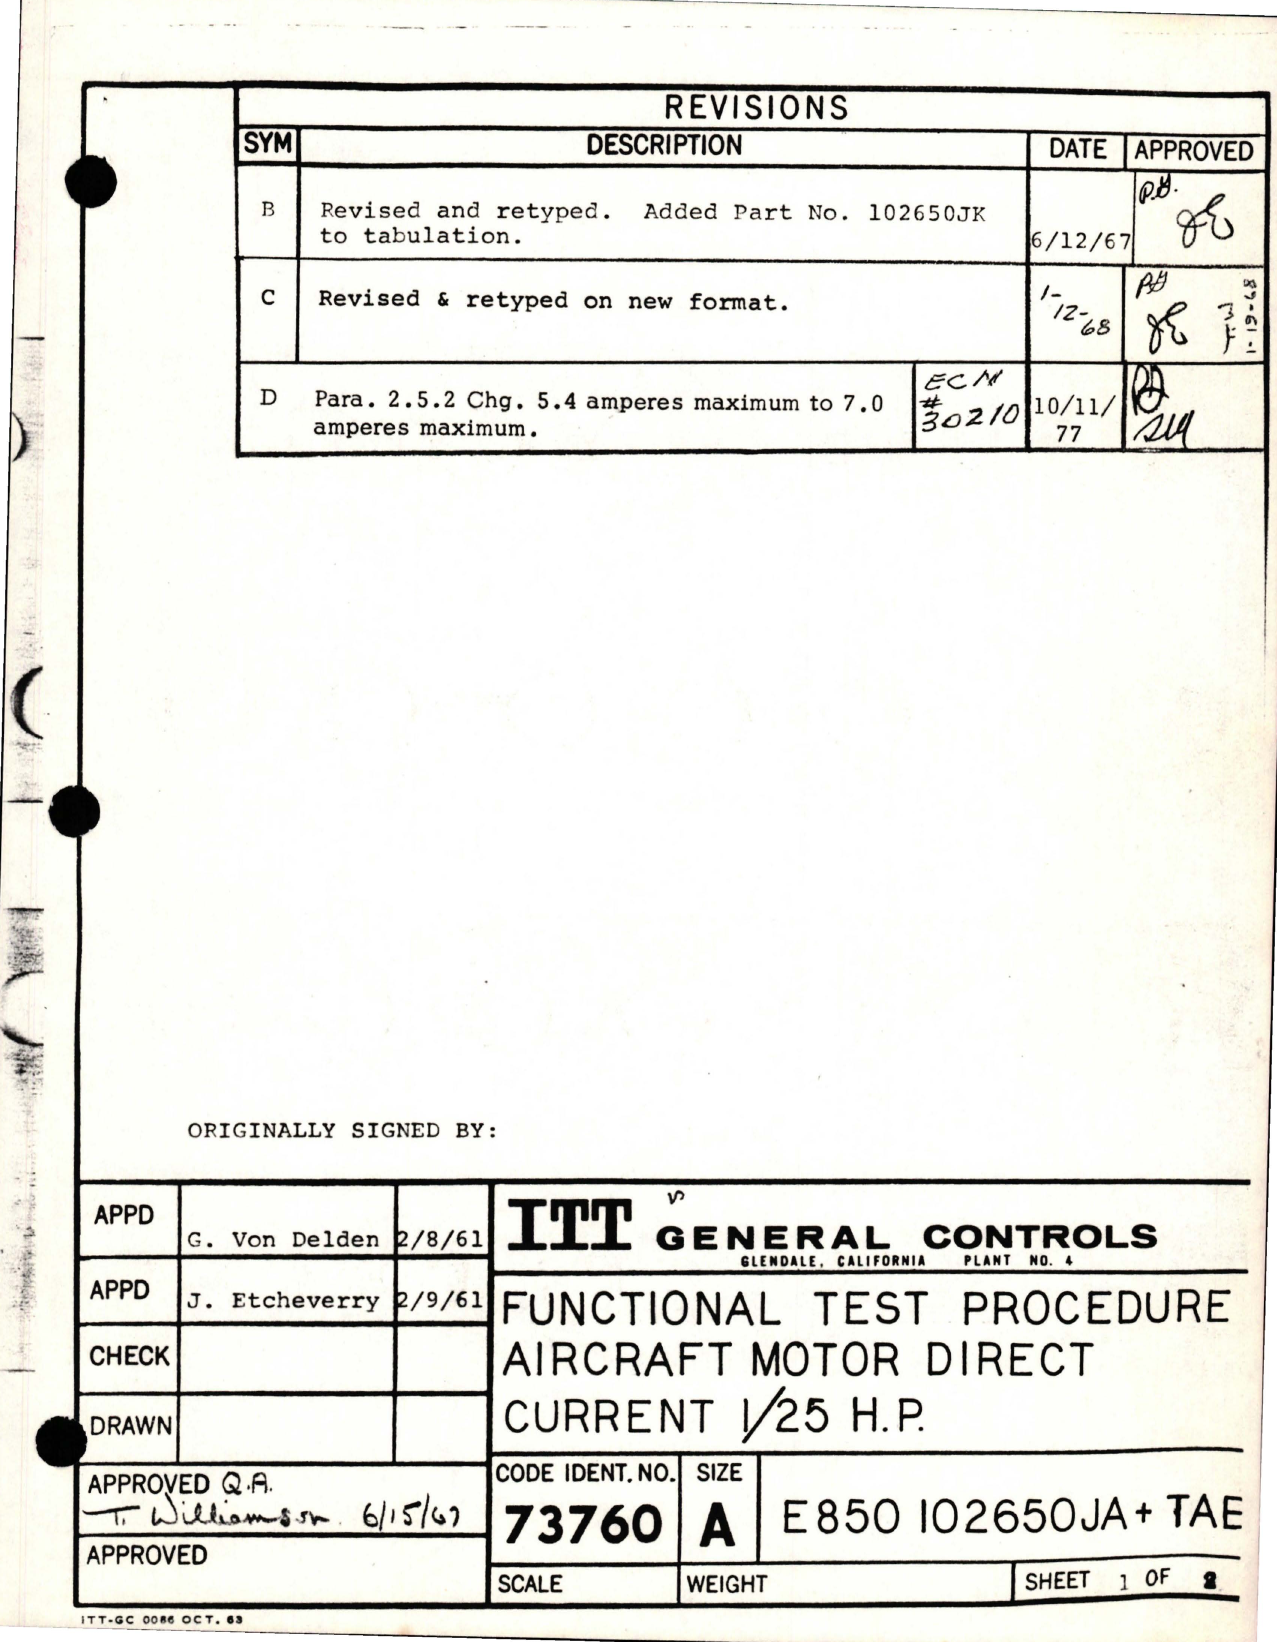 Sample page 1 from AirCorps Library document: Functional Test Procedure for Aircraft Motor Direct Current 1/25 HP